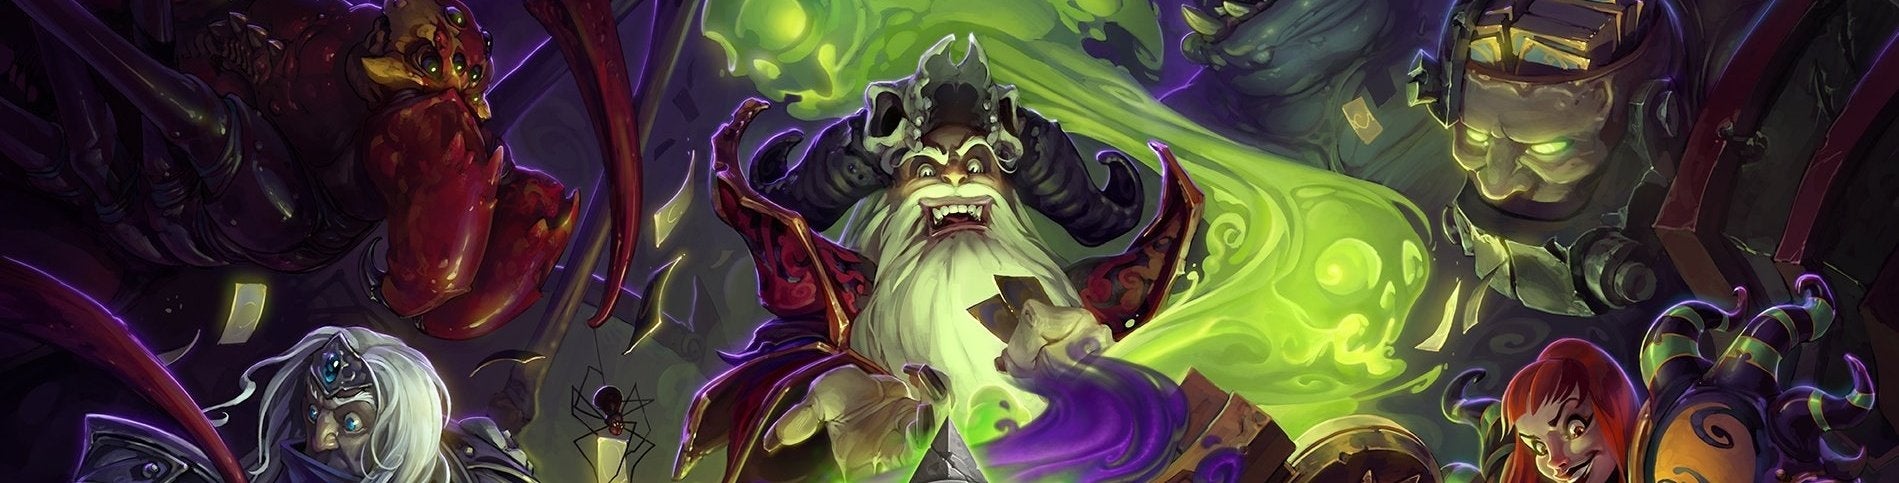 Image for Hearthstone: Naxxramas strategy guide and walkthrough